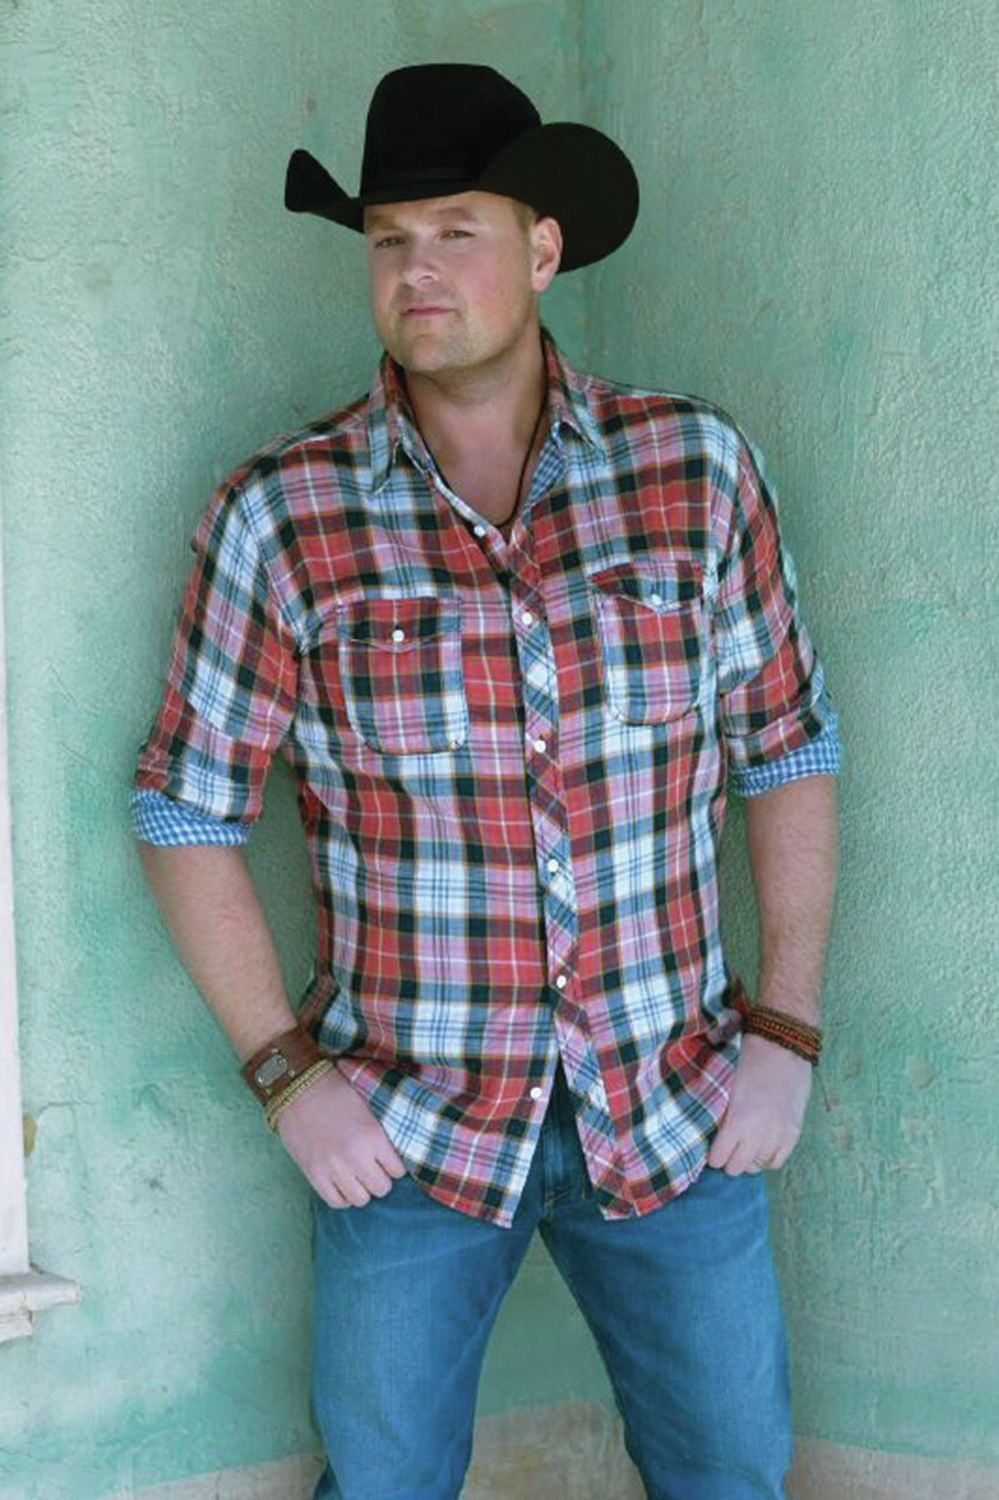 HOMECOMING - Gord Bamford is set to make his return to Central Alberta when his Certified Country Tour with JoeNichols rolls into the ENMAX Centrium on April 8th. The show will be the Lacombe native’s first major performance in thearea since he moved to Nashville in August last year.